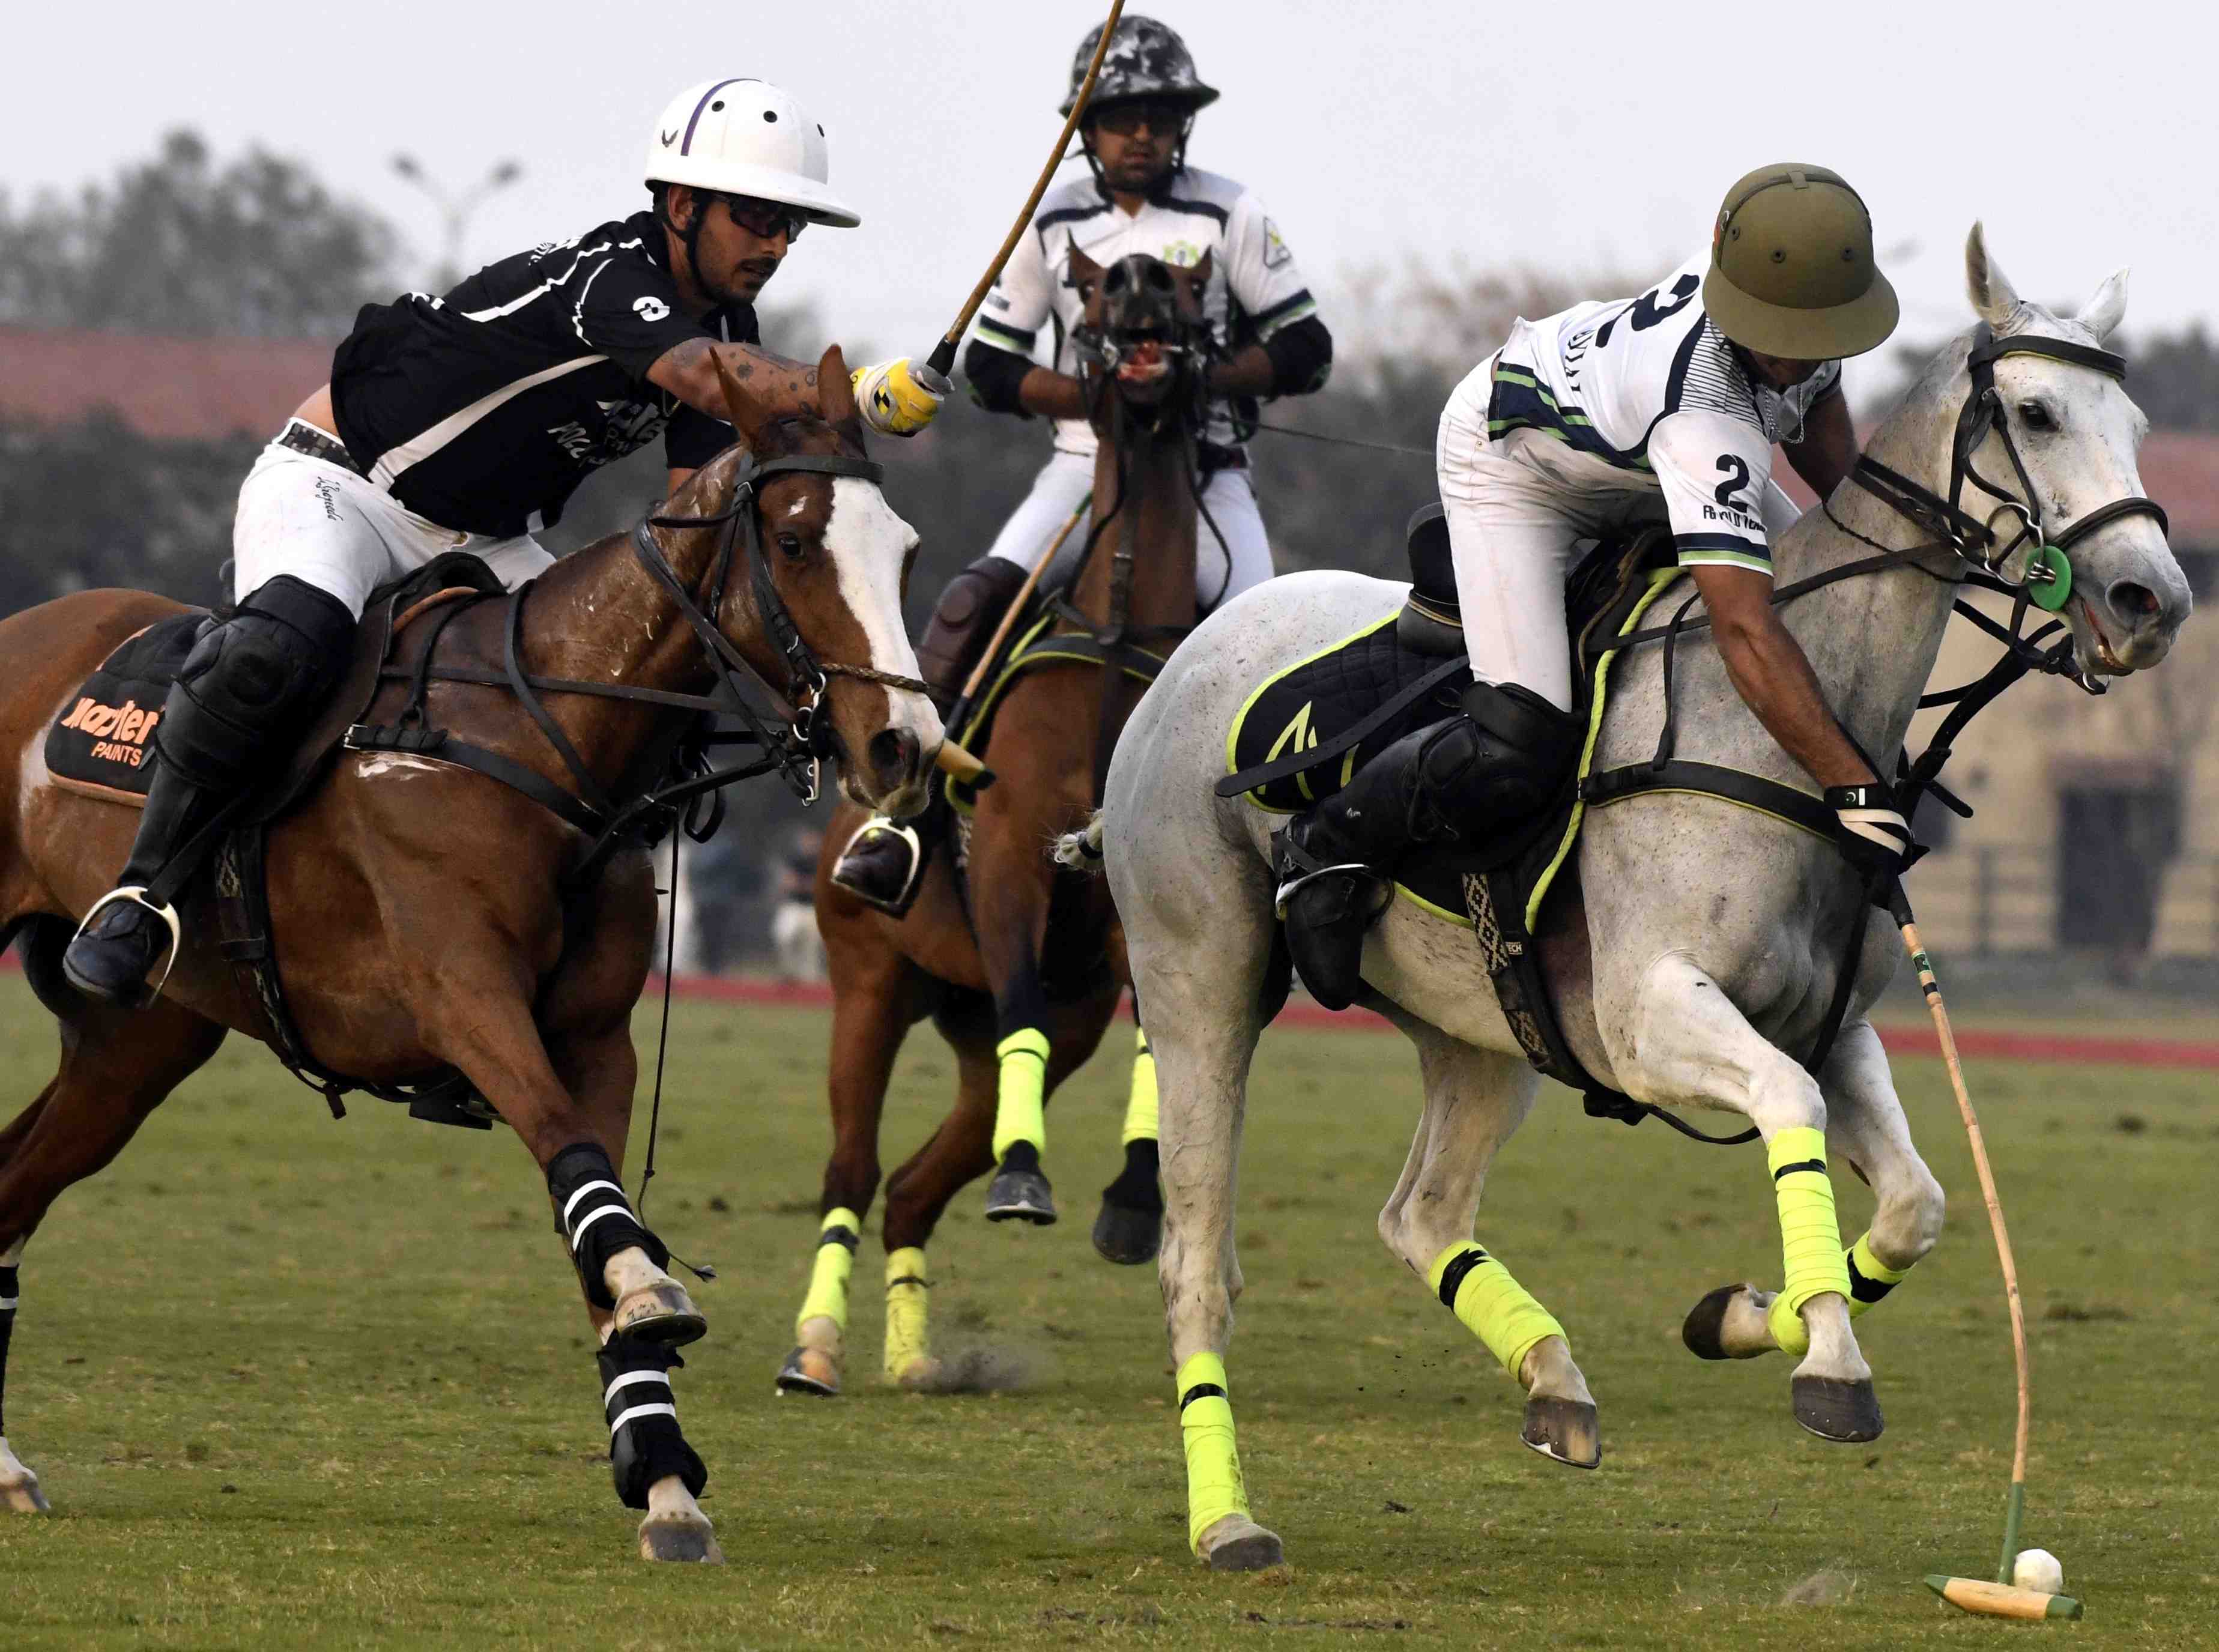 National Open Polo: FG Polo clinch victory in nail-biting semifinal